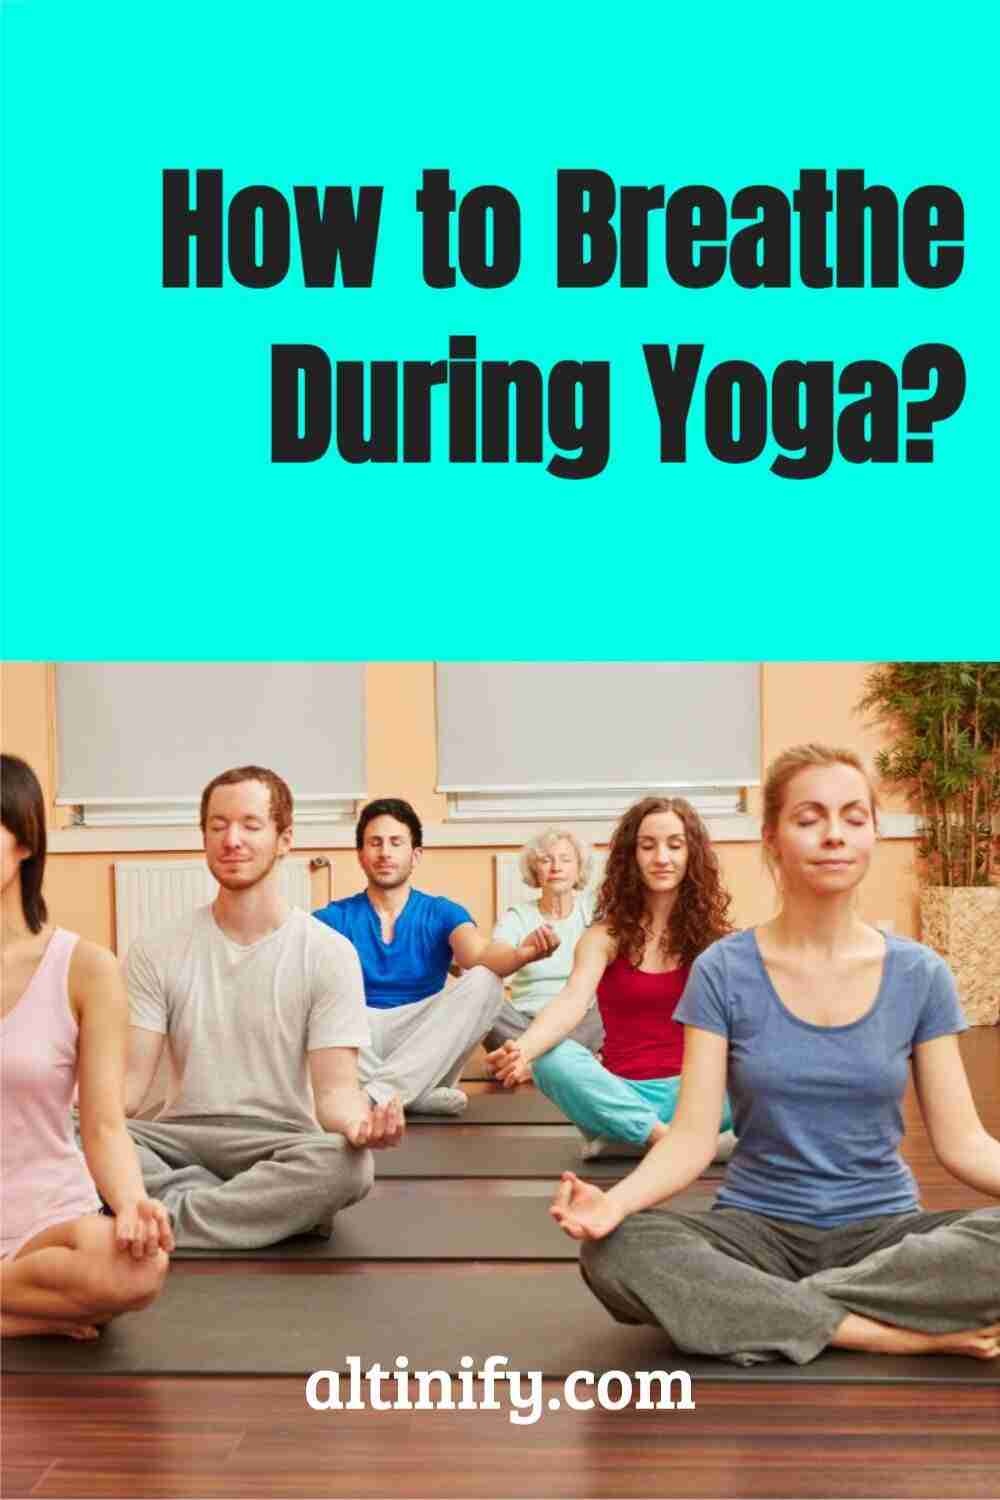 This Is The Proper Way To Breathe During Yoga